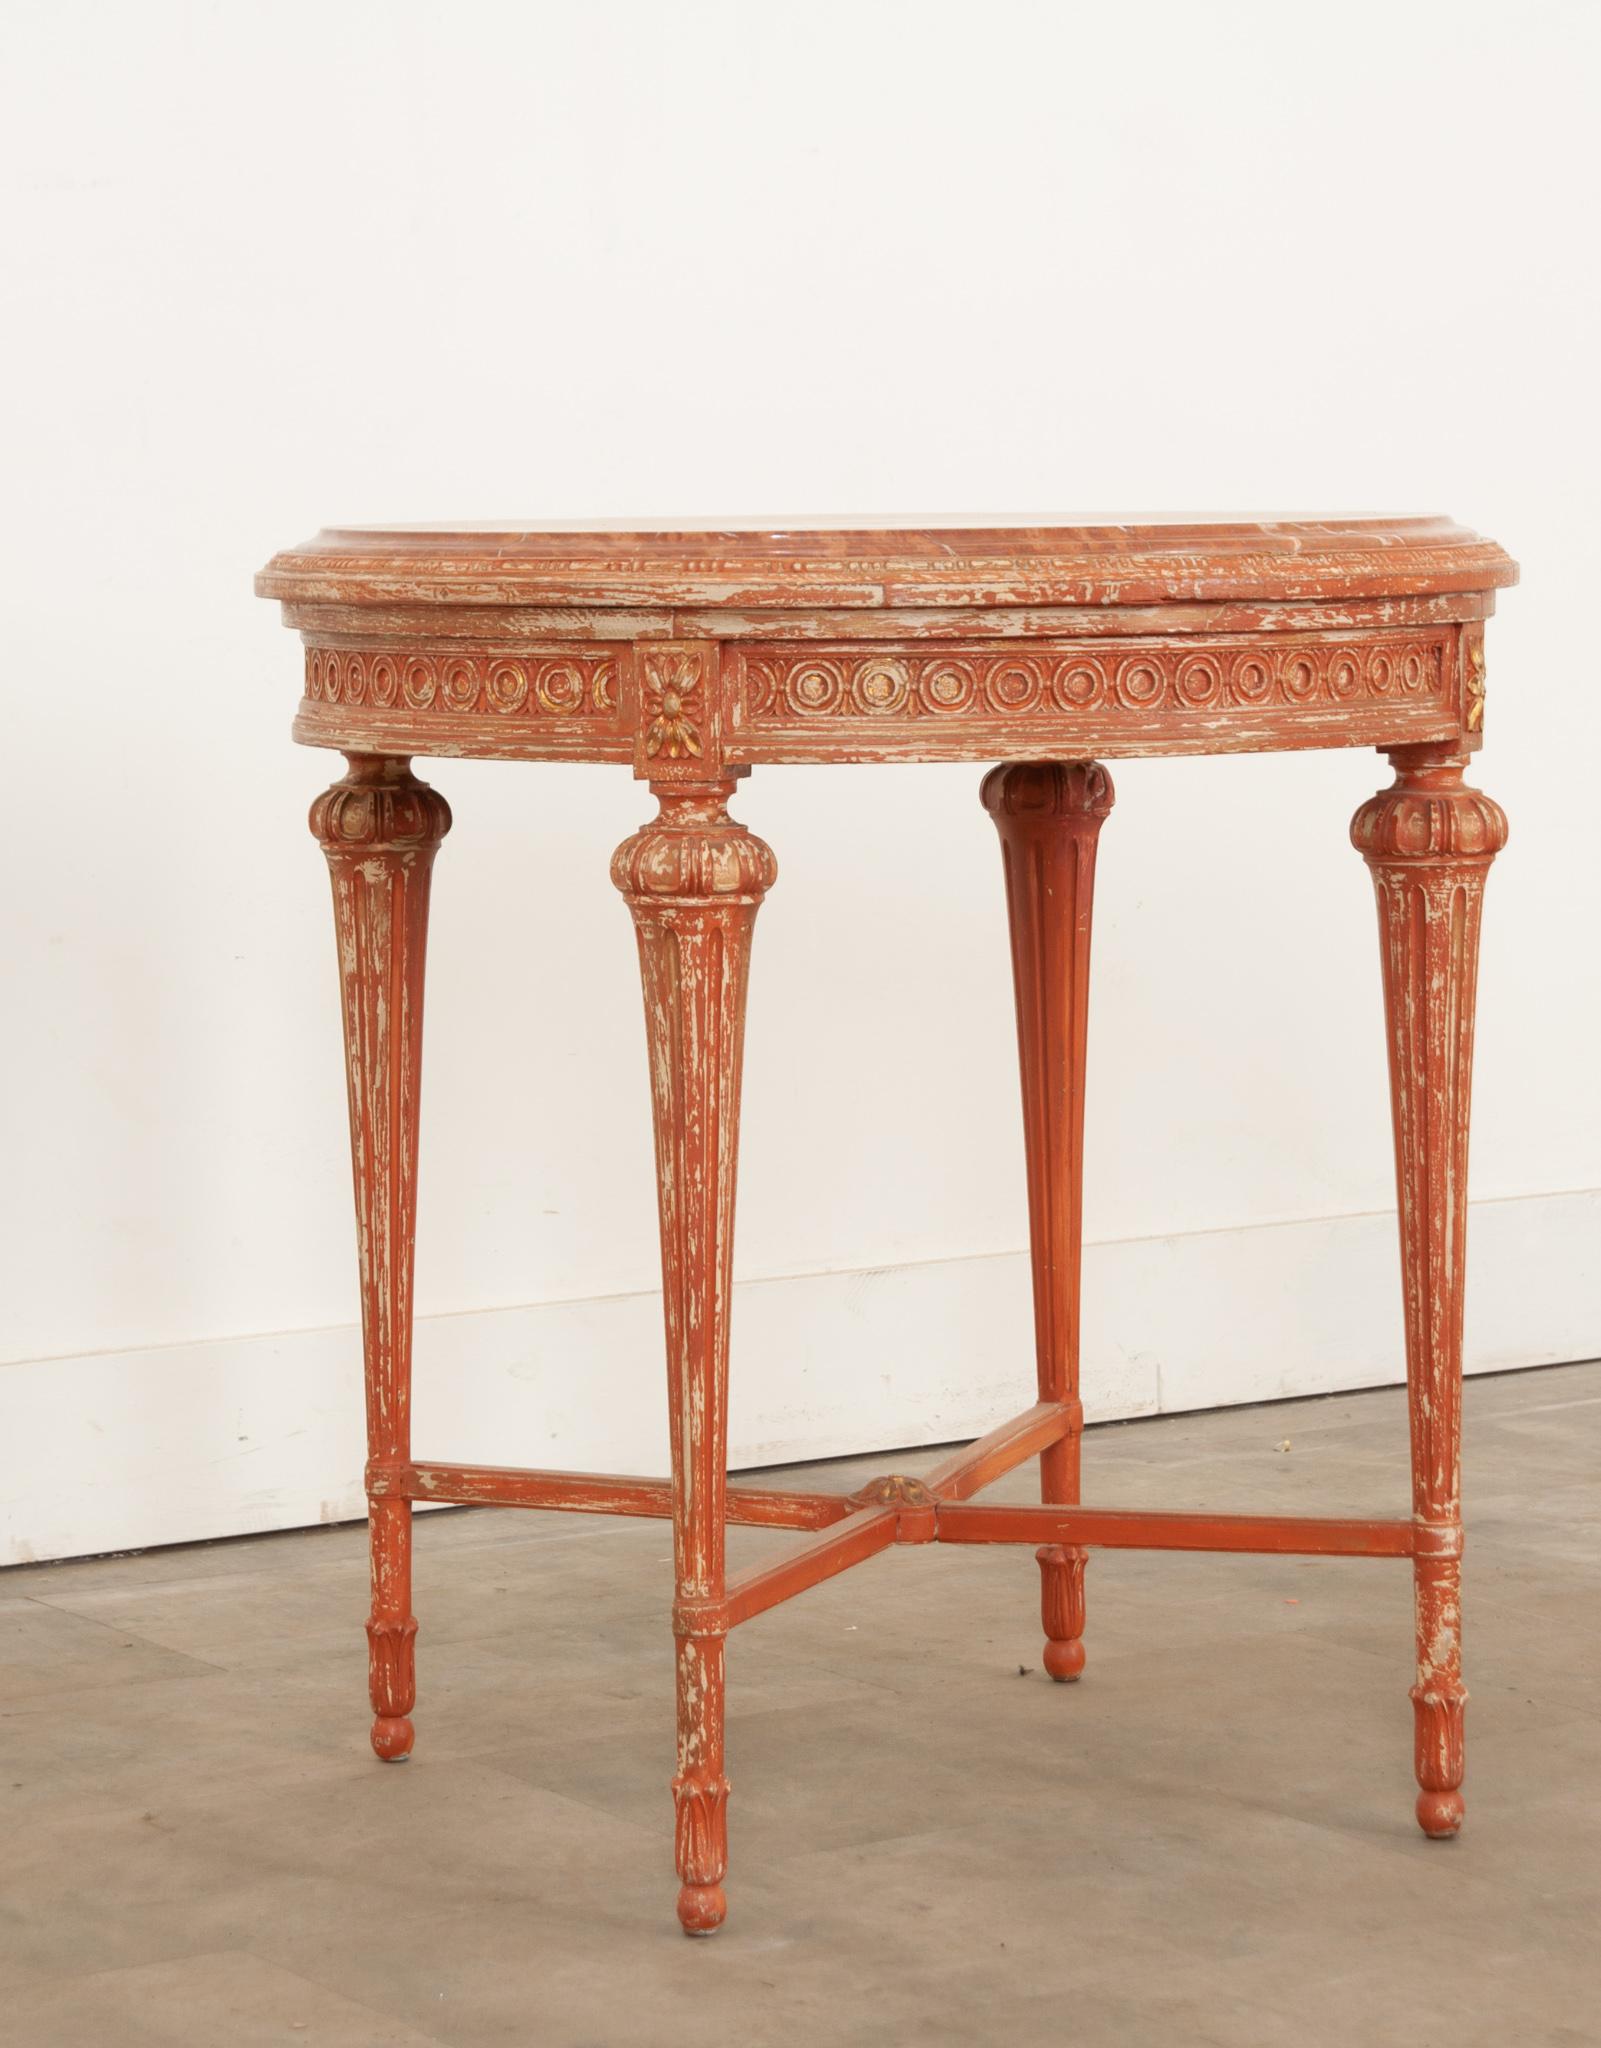 Hand-carved in France during the 19th Century this Louis XVI style round table features a thick gorgeous inset marble top with a chamfered edge. The rosewood colored stone top with white and charcoal veining and wonderful patterns throughout  rests